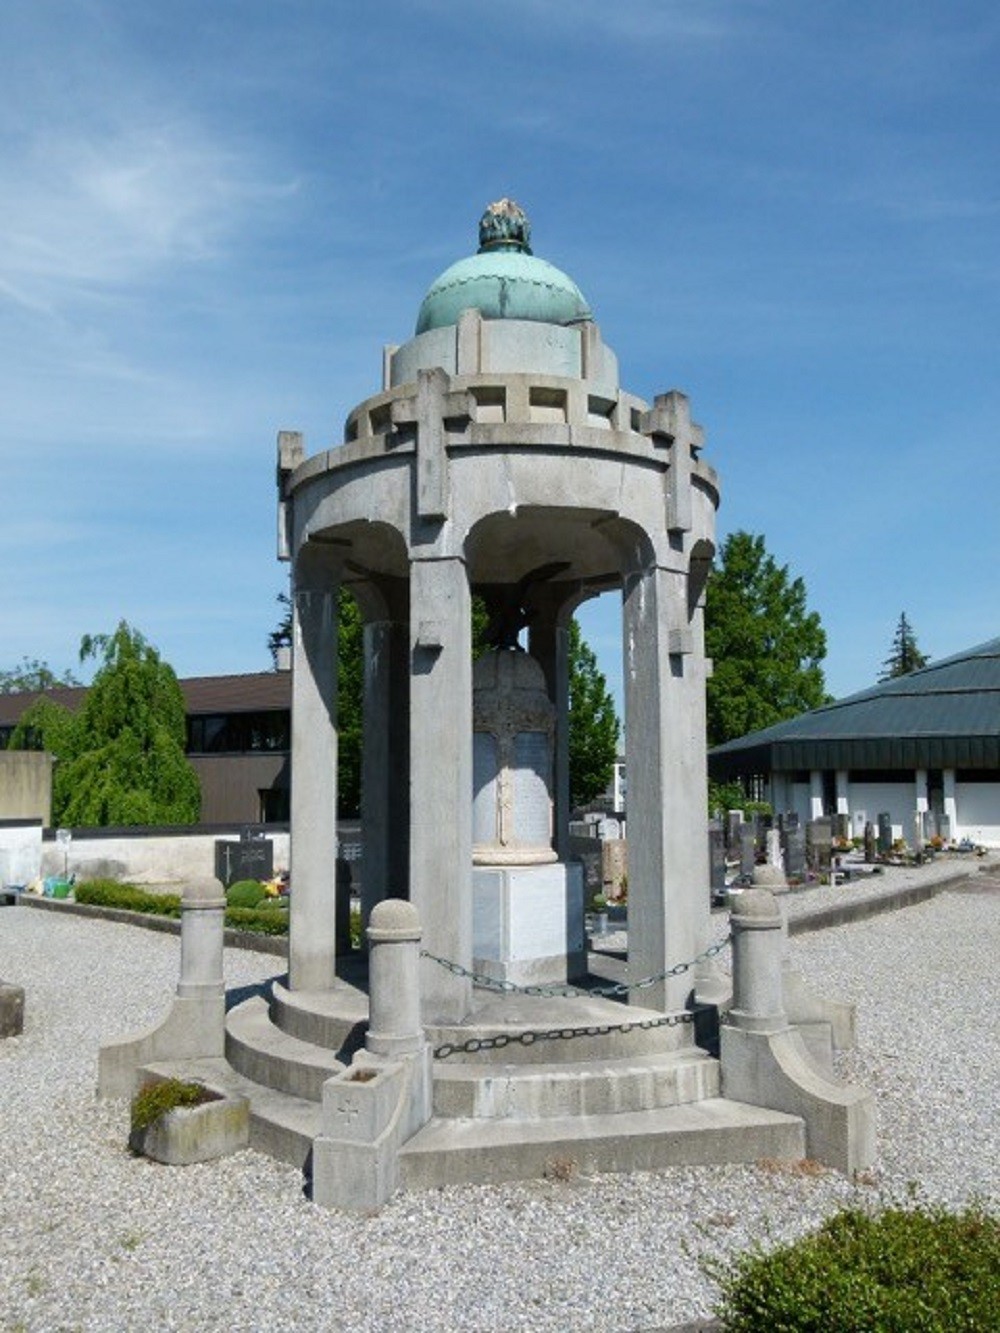 Memorial To Sons Of Fussach Who Died In WW I And WW II #5